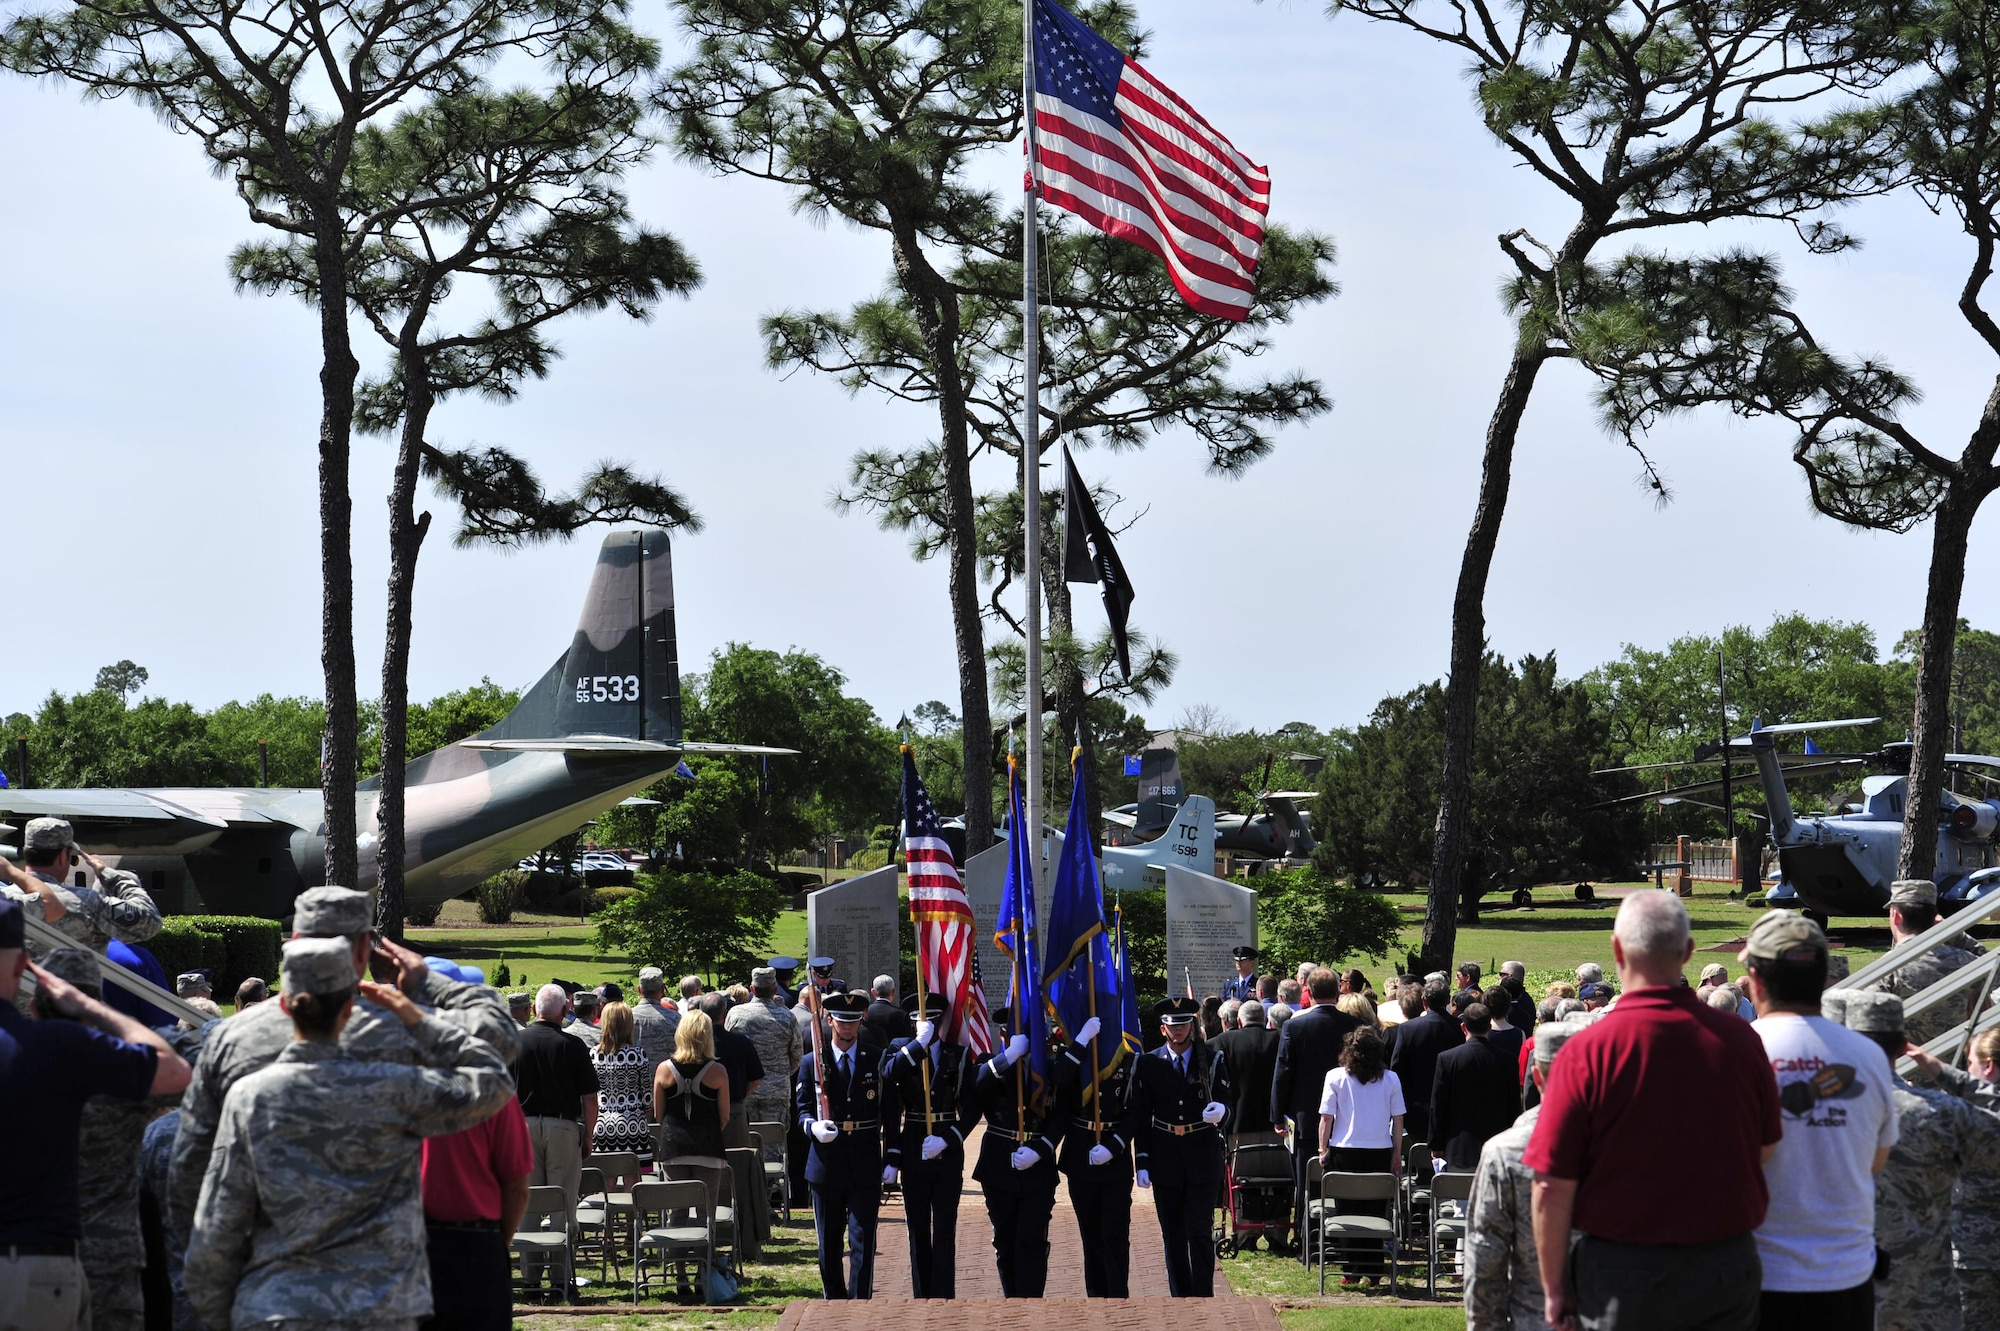 The honor guard departs the Operation Eagle Claw memorial ceremony after presenting the colors at the air park on Hurlburt Field, Fla., April 24, 2015. Operation Eagle Claw, conducted April 24, 1980, was a joint services mission to rescue Americans who were being held hostage by a mob in Tehran, Iran, since Nov. 4, 1979. Tragically, the attempt ended in the death of eight service members. (U.S. Air Force photo/Staff Sgt. Melanie Holochwost)